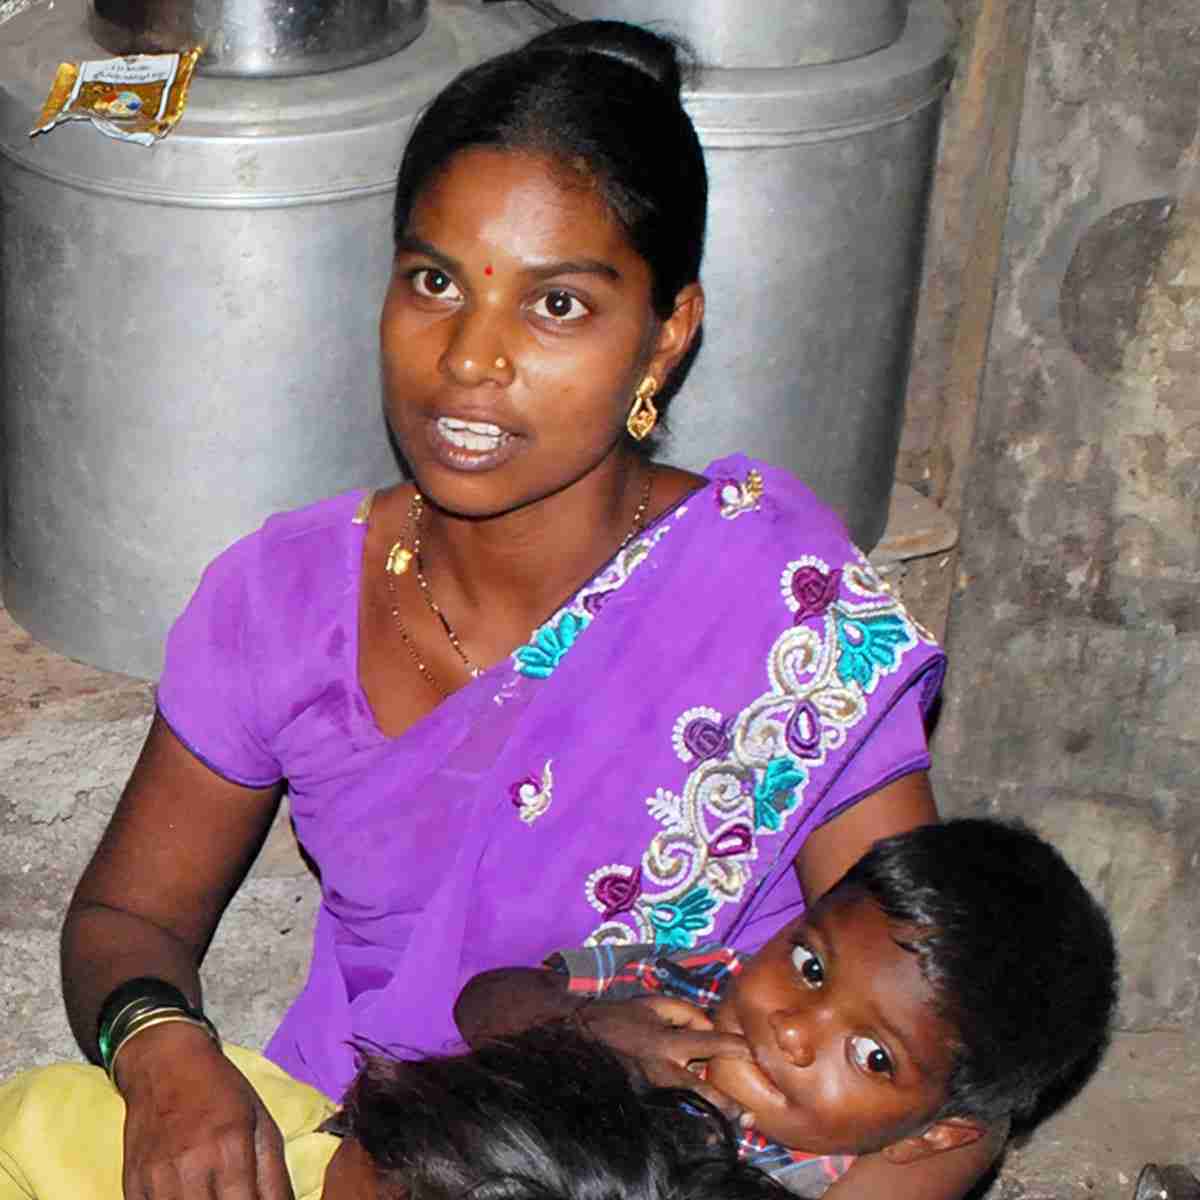 With her husband out of the picture, illiterate Dayita was forced to become the sole provider for her four children.